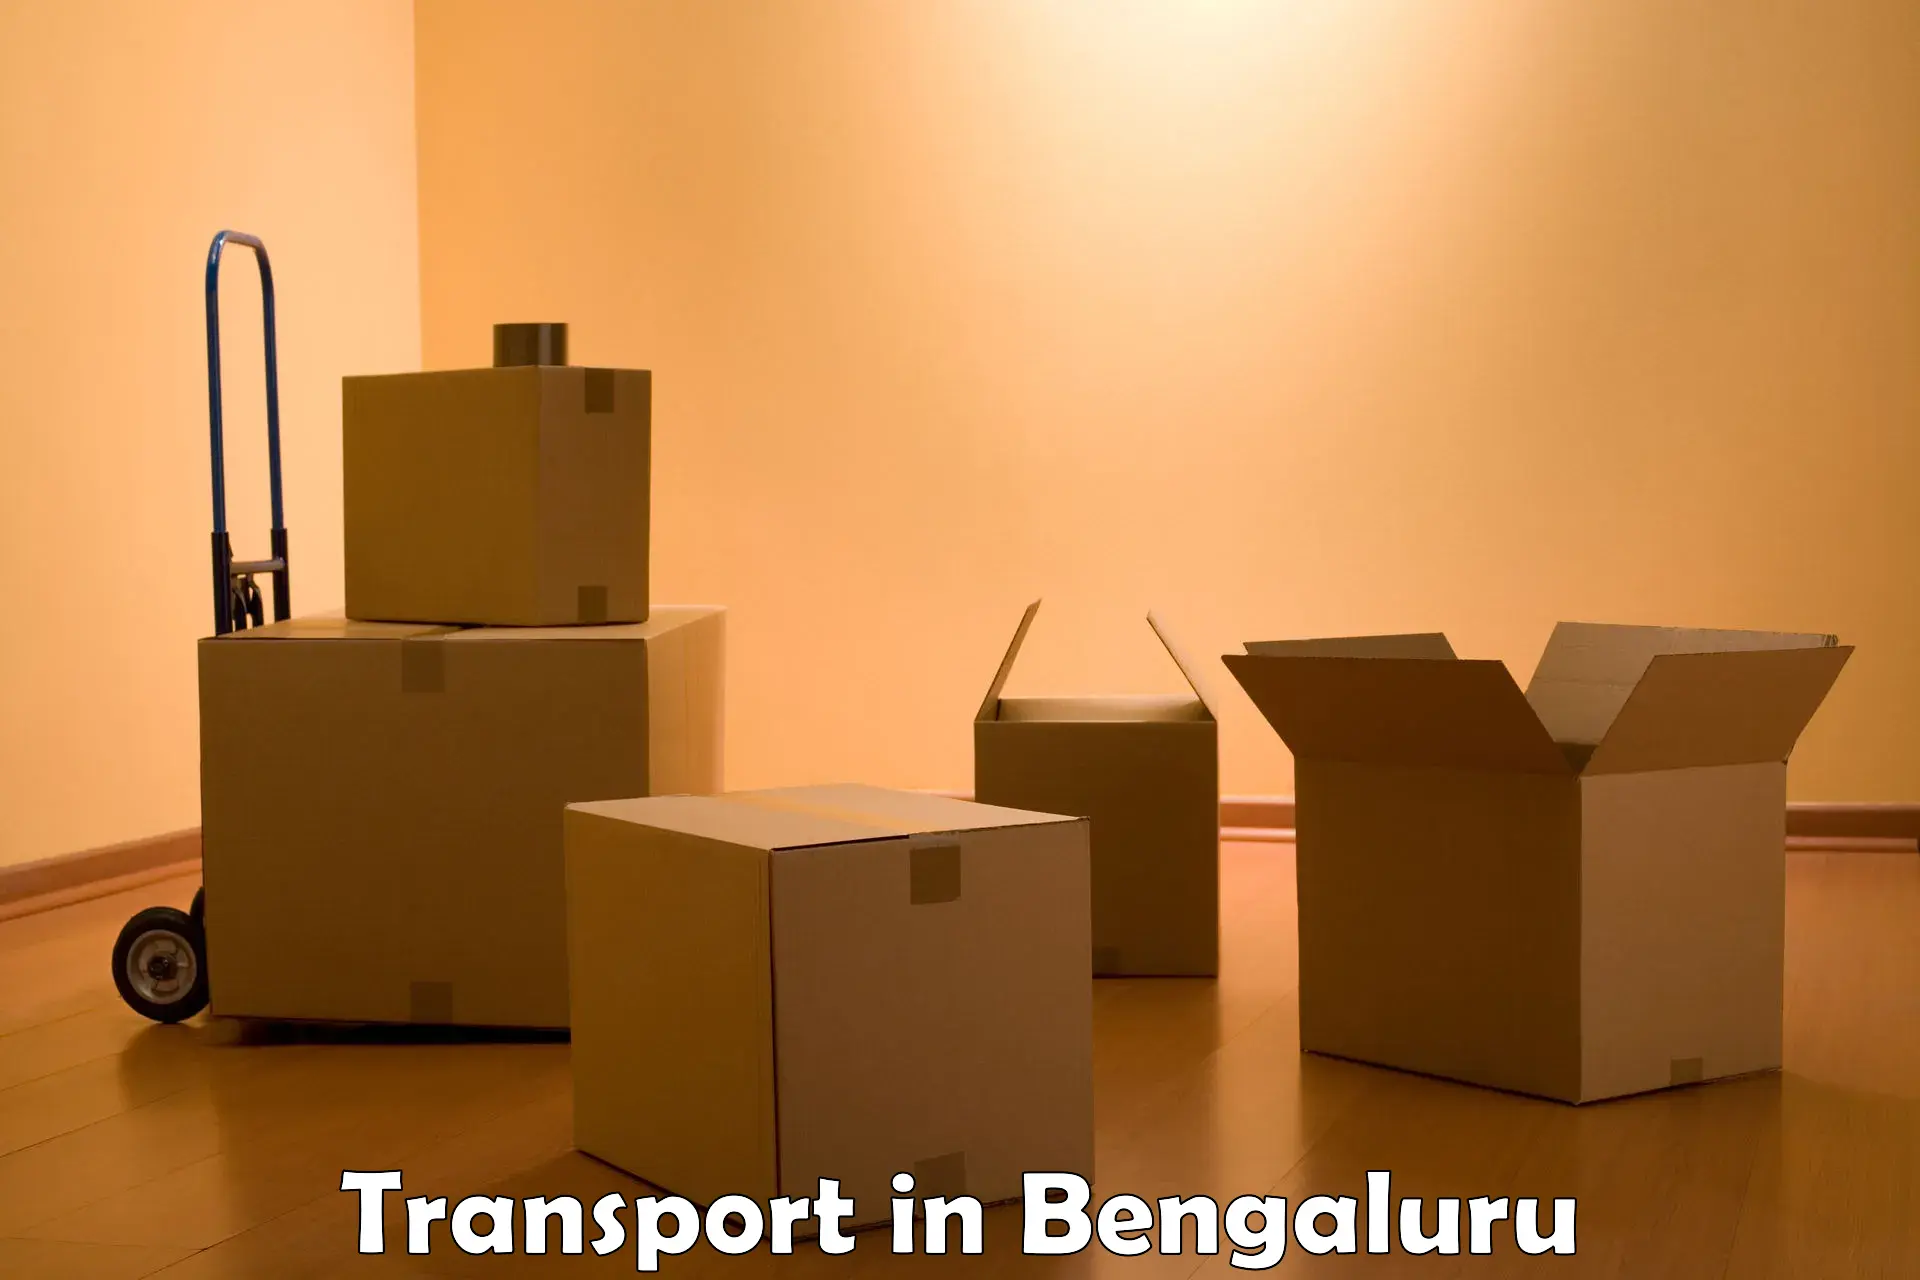 Container transportation services in Bengaluru